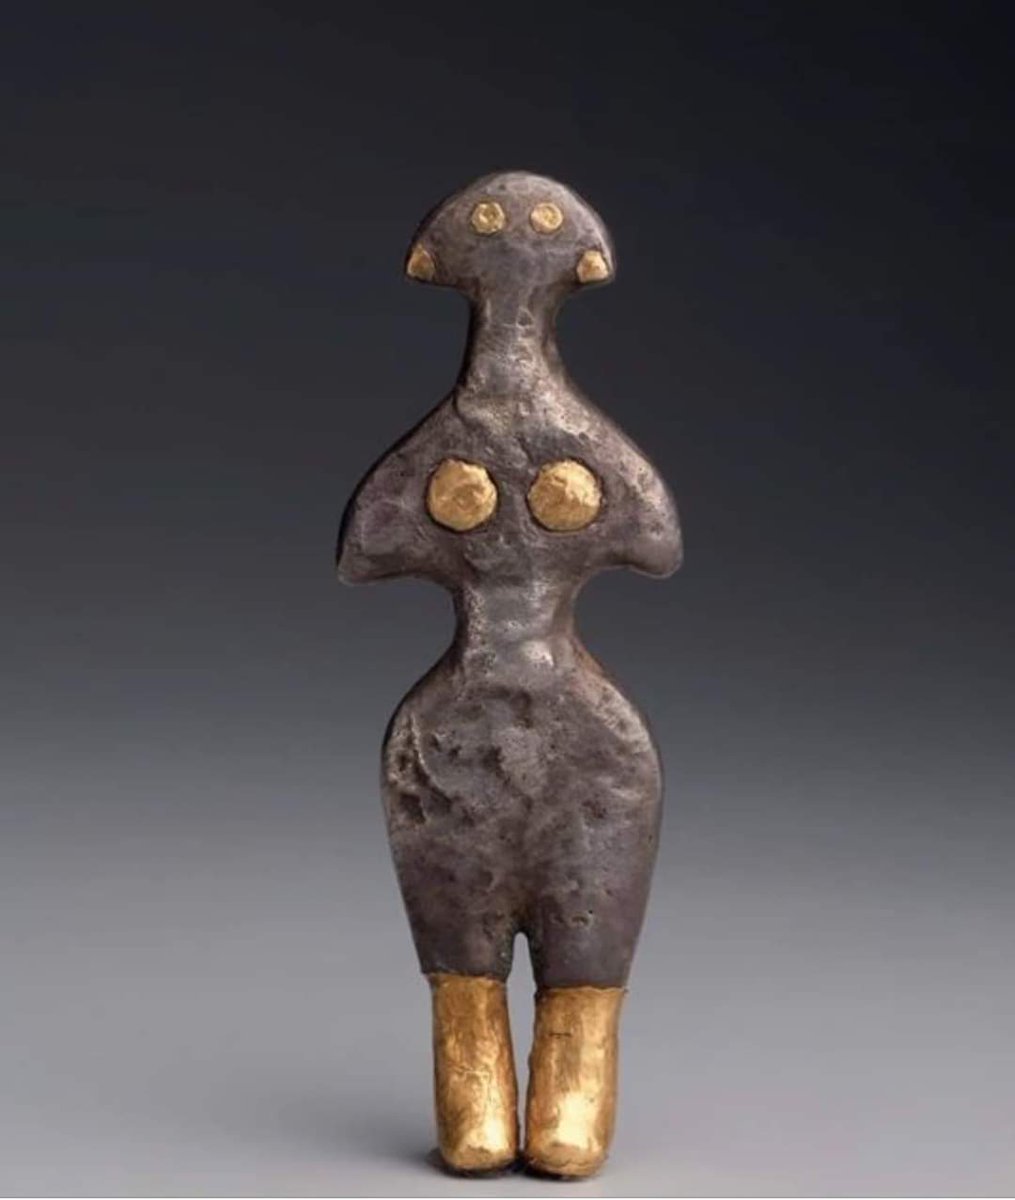 Anatolian Mother Goddess, standing and holding her breast, 2500-2300 BC (Early Bronze Age). Statuette made of cold hammered silver with gold inlays in the eyes, ears and breasts, and gold leaf boots 

(H: 12.7cm)

Museum of Fine Arts, Boston

#archaeohistories